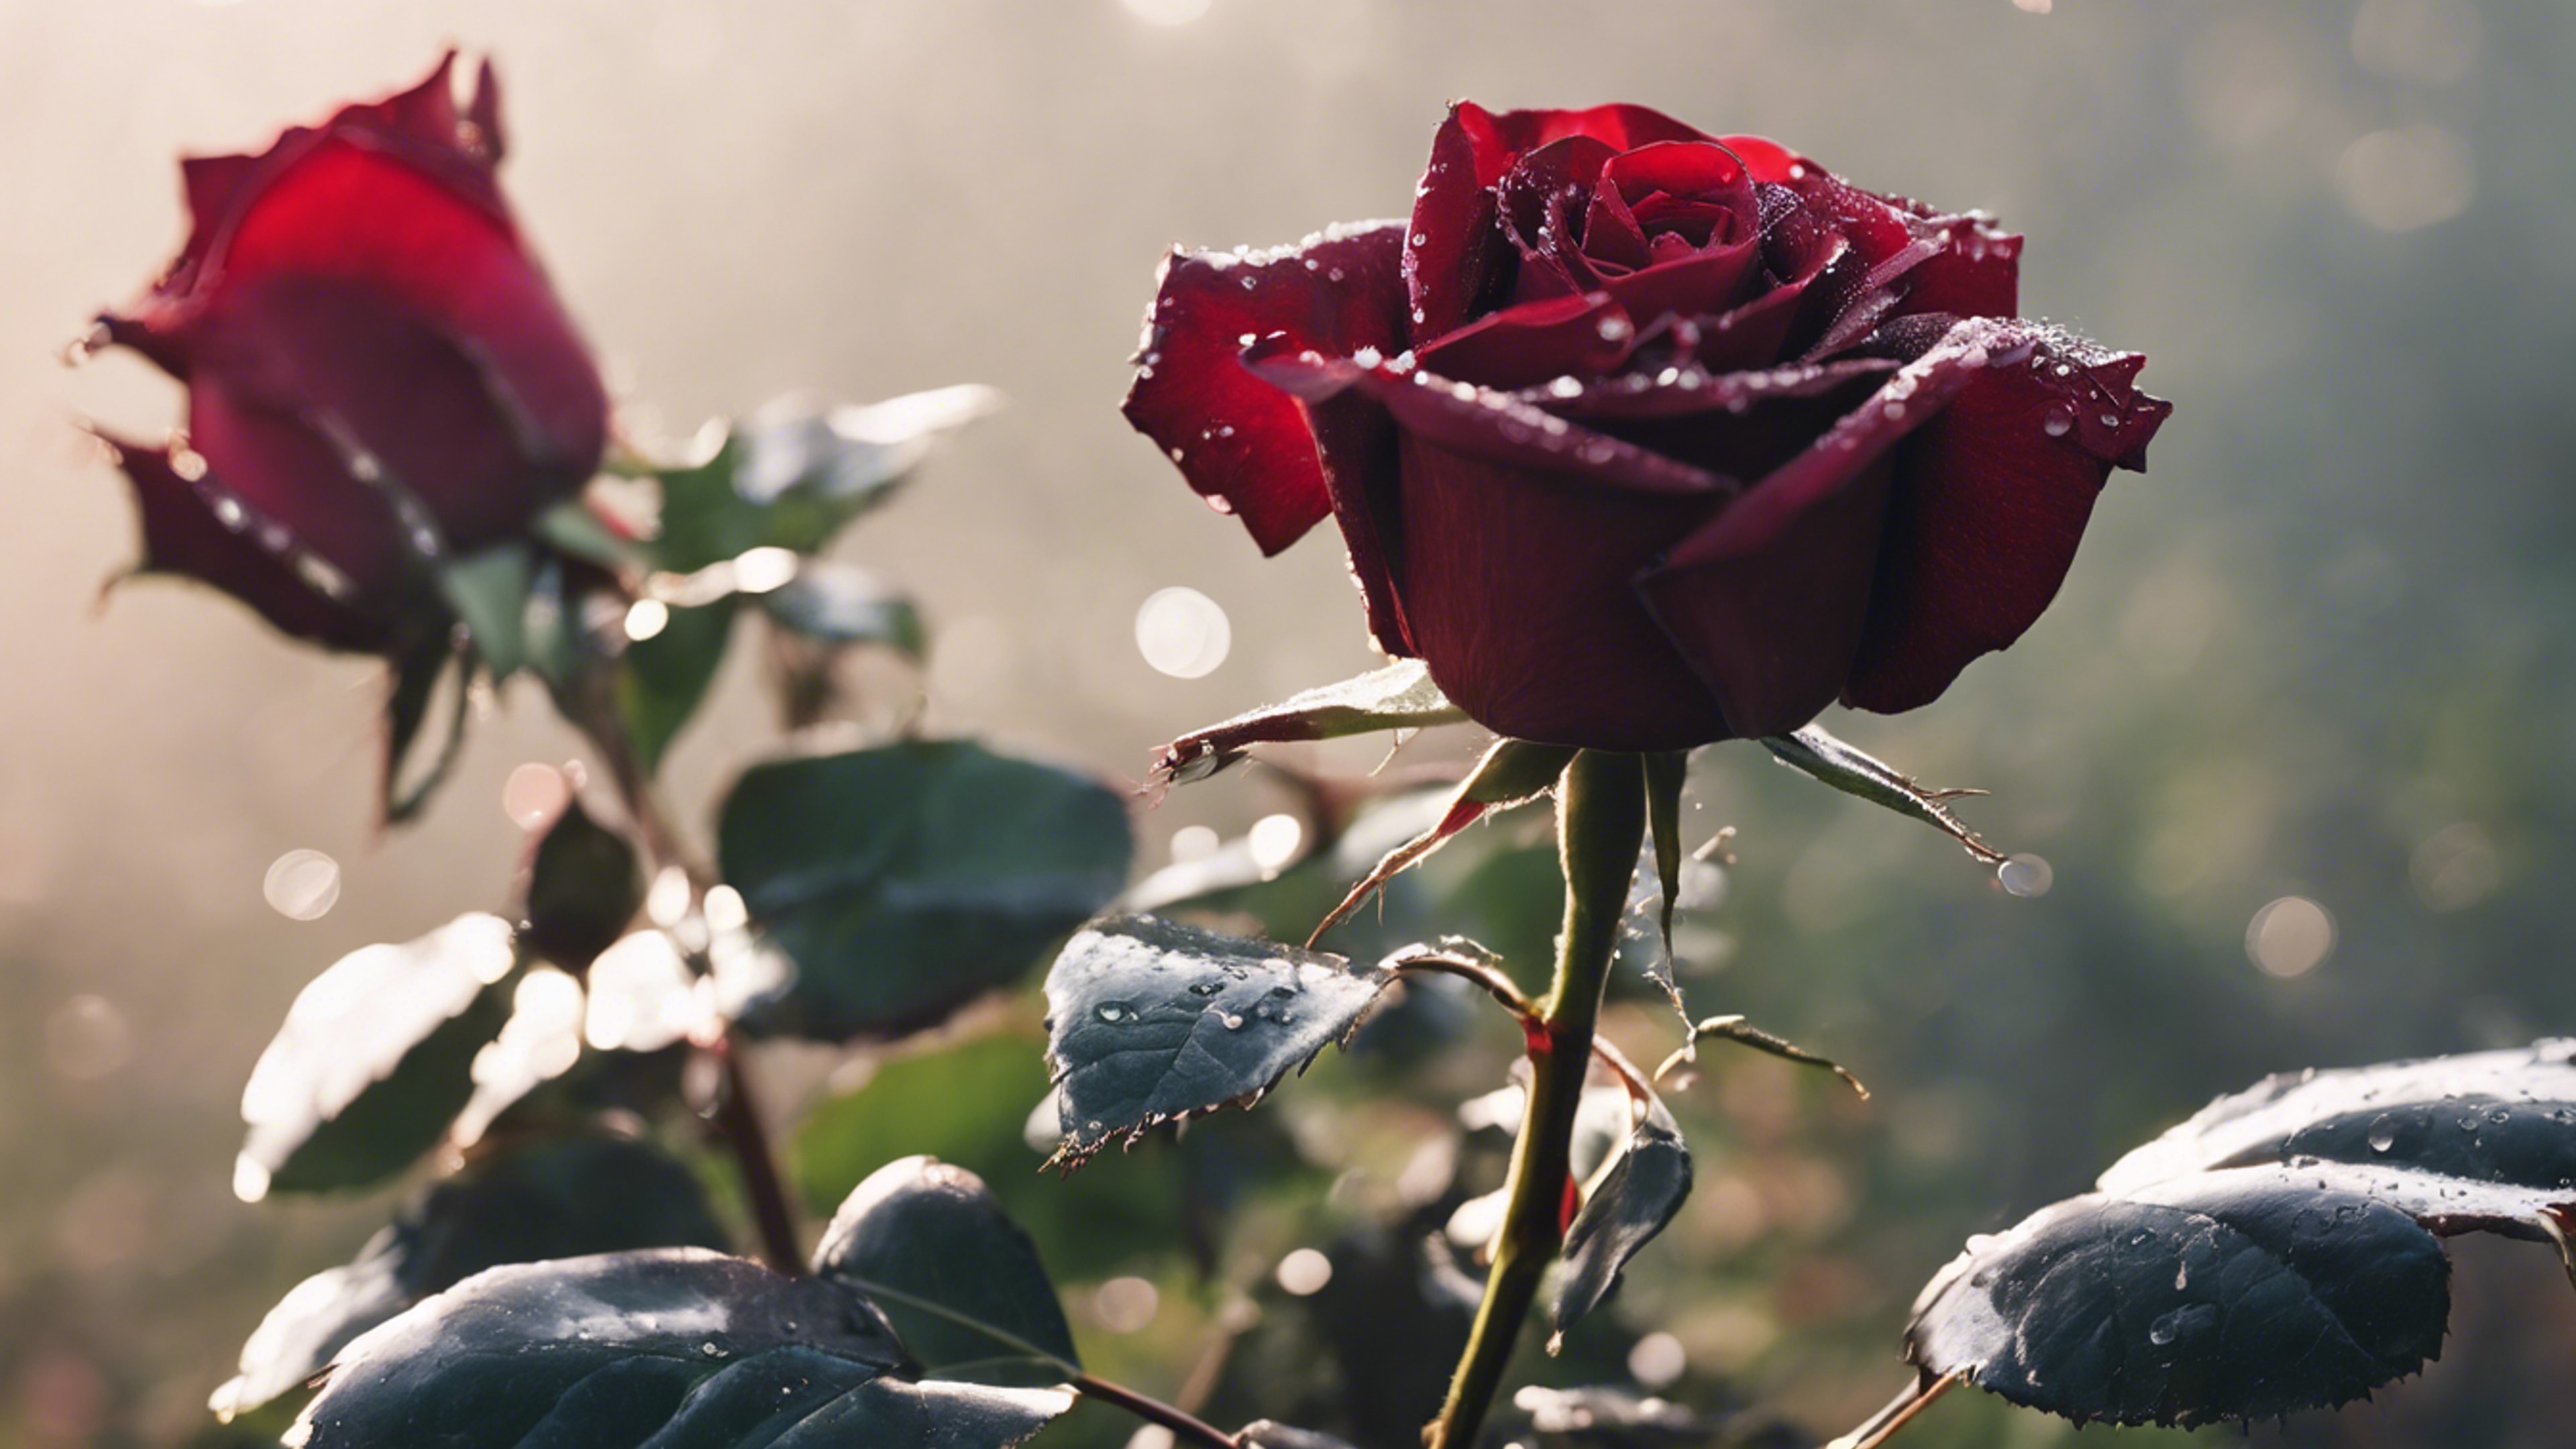 A lush dark red rose in full bloom, glistening with morning dew. Wallpaper[3308270db75d4dd78aa2]